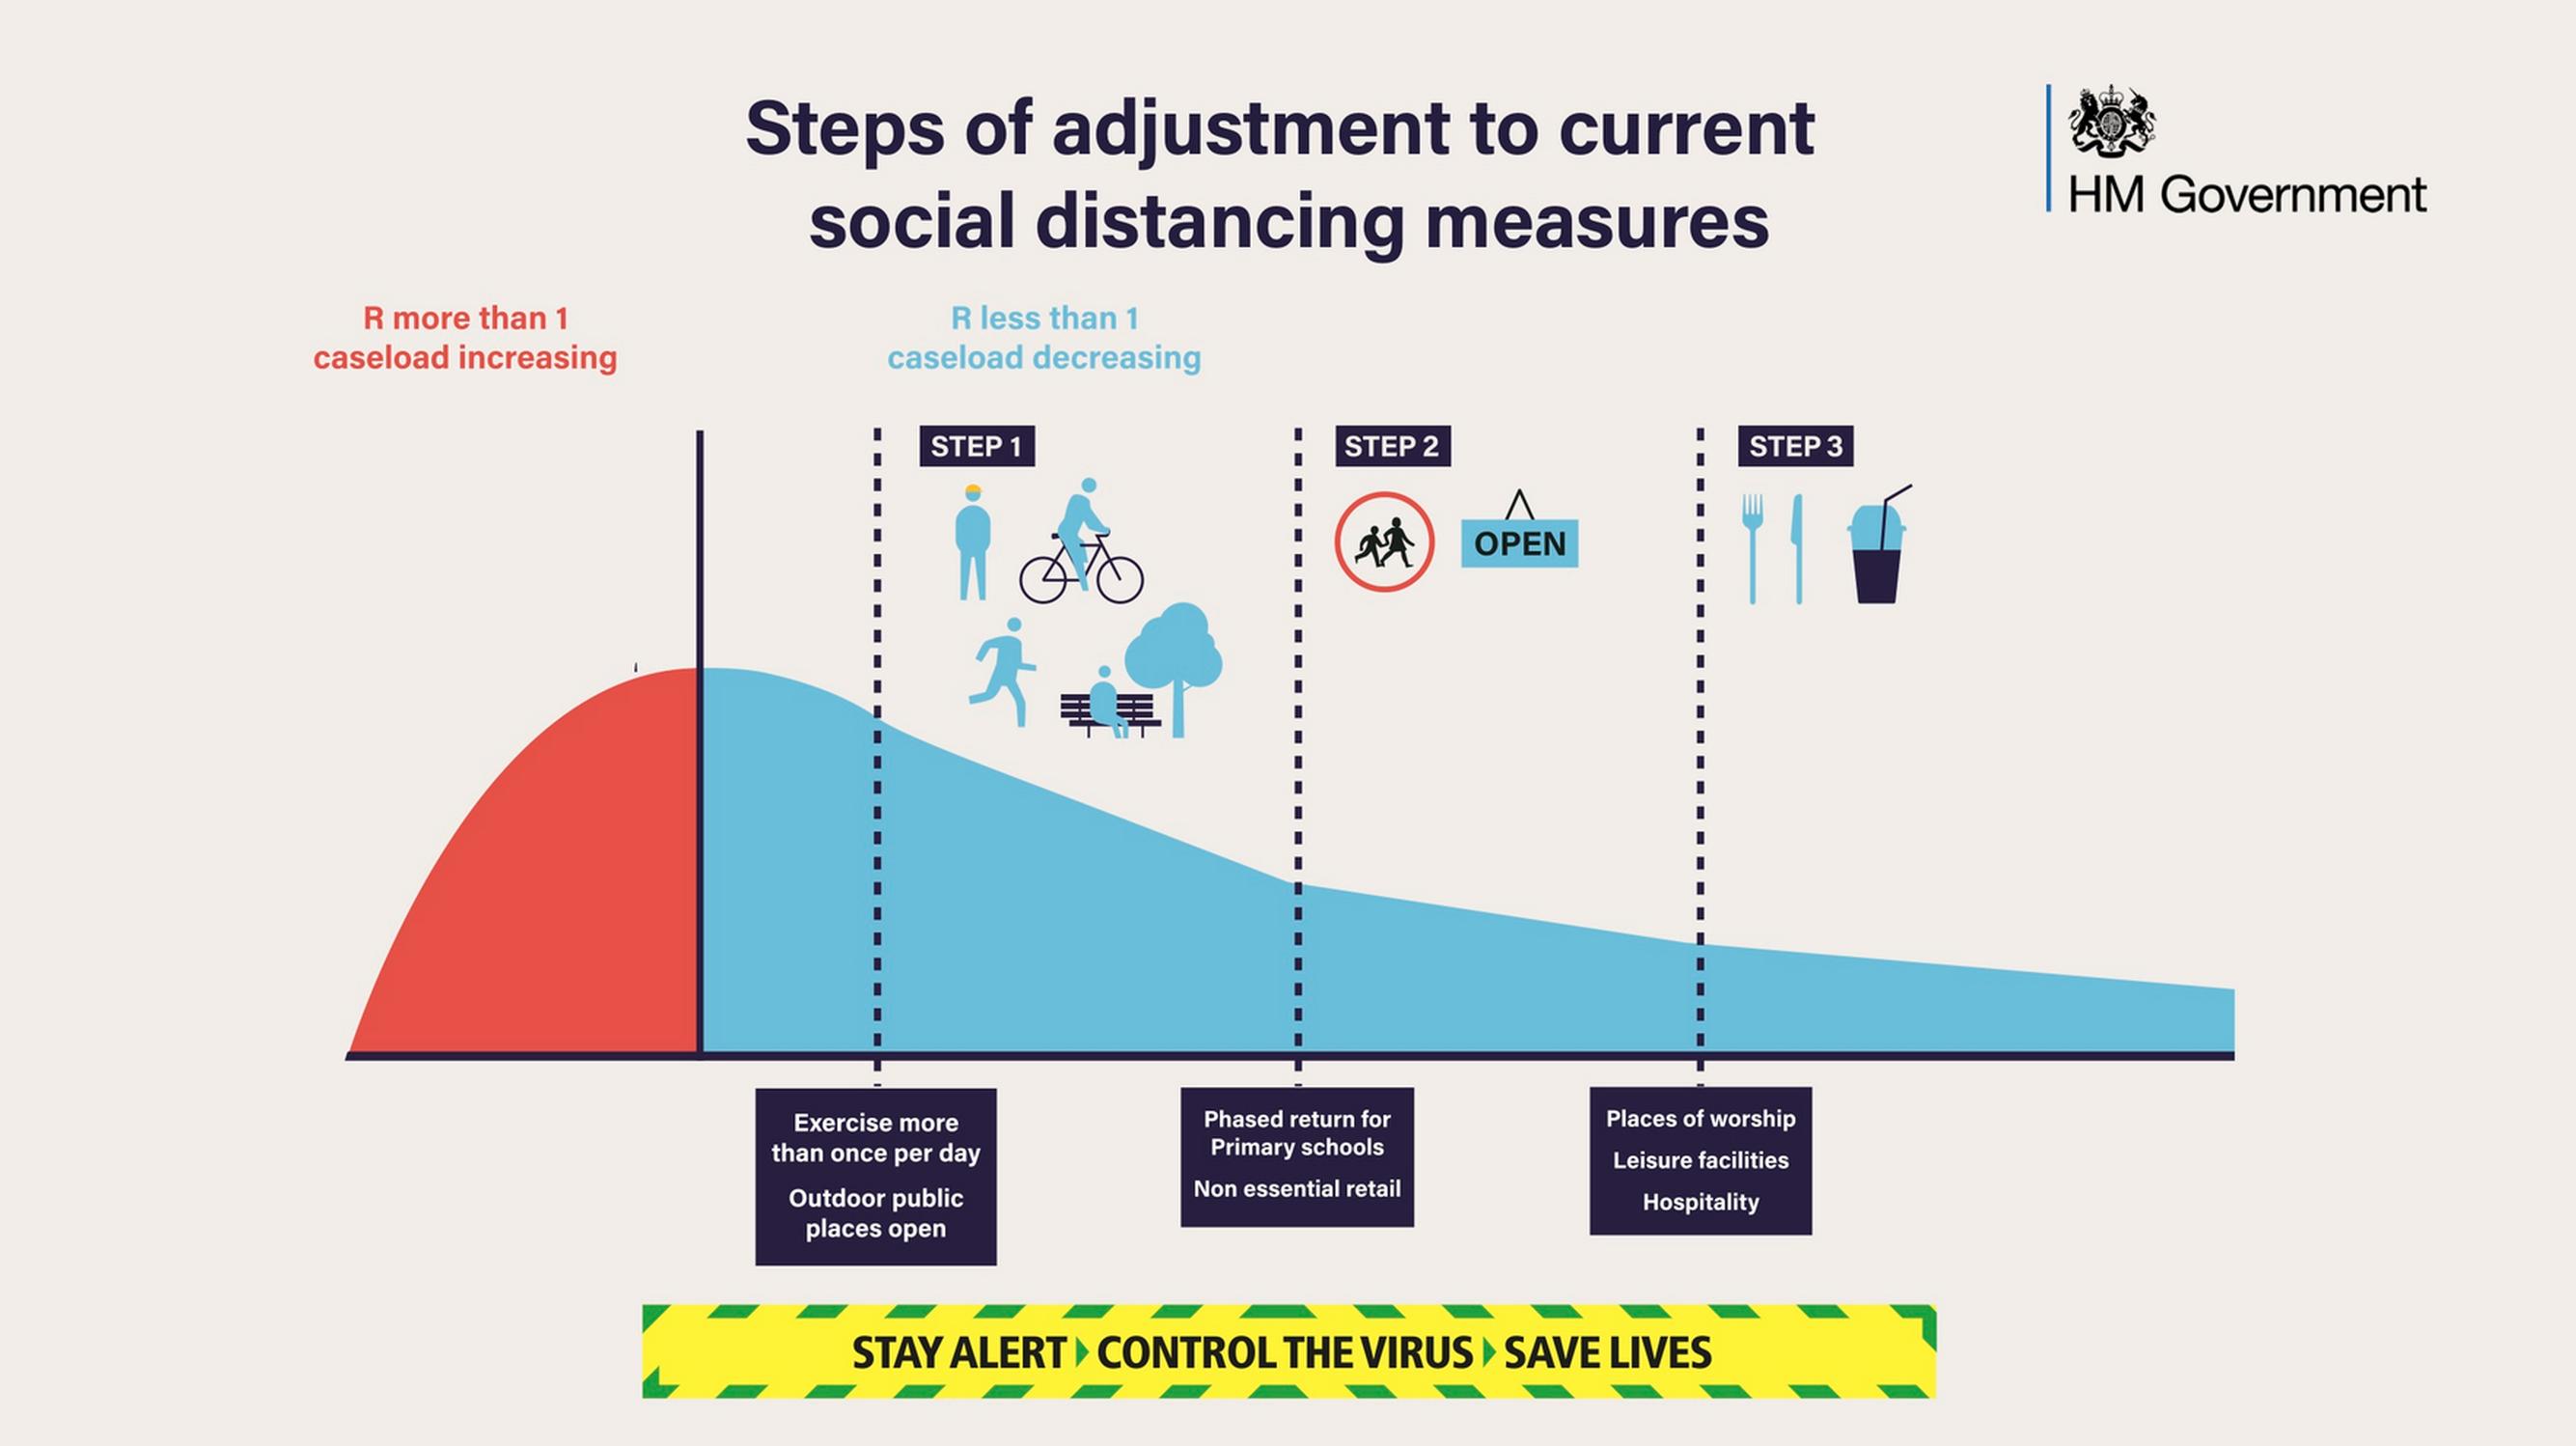 The UK Government`s proposed steps of adjustment of social distancing rules